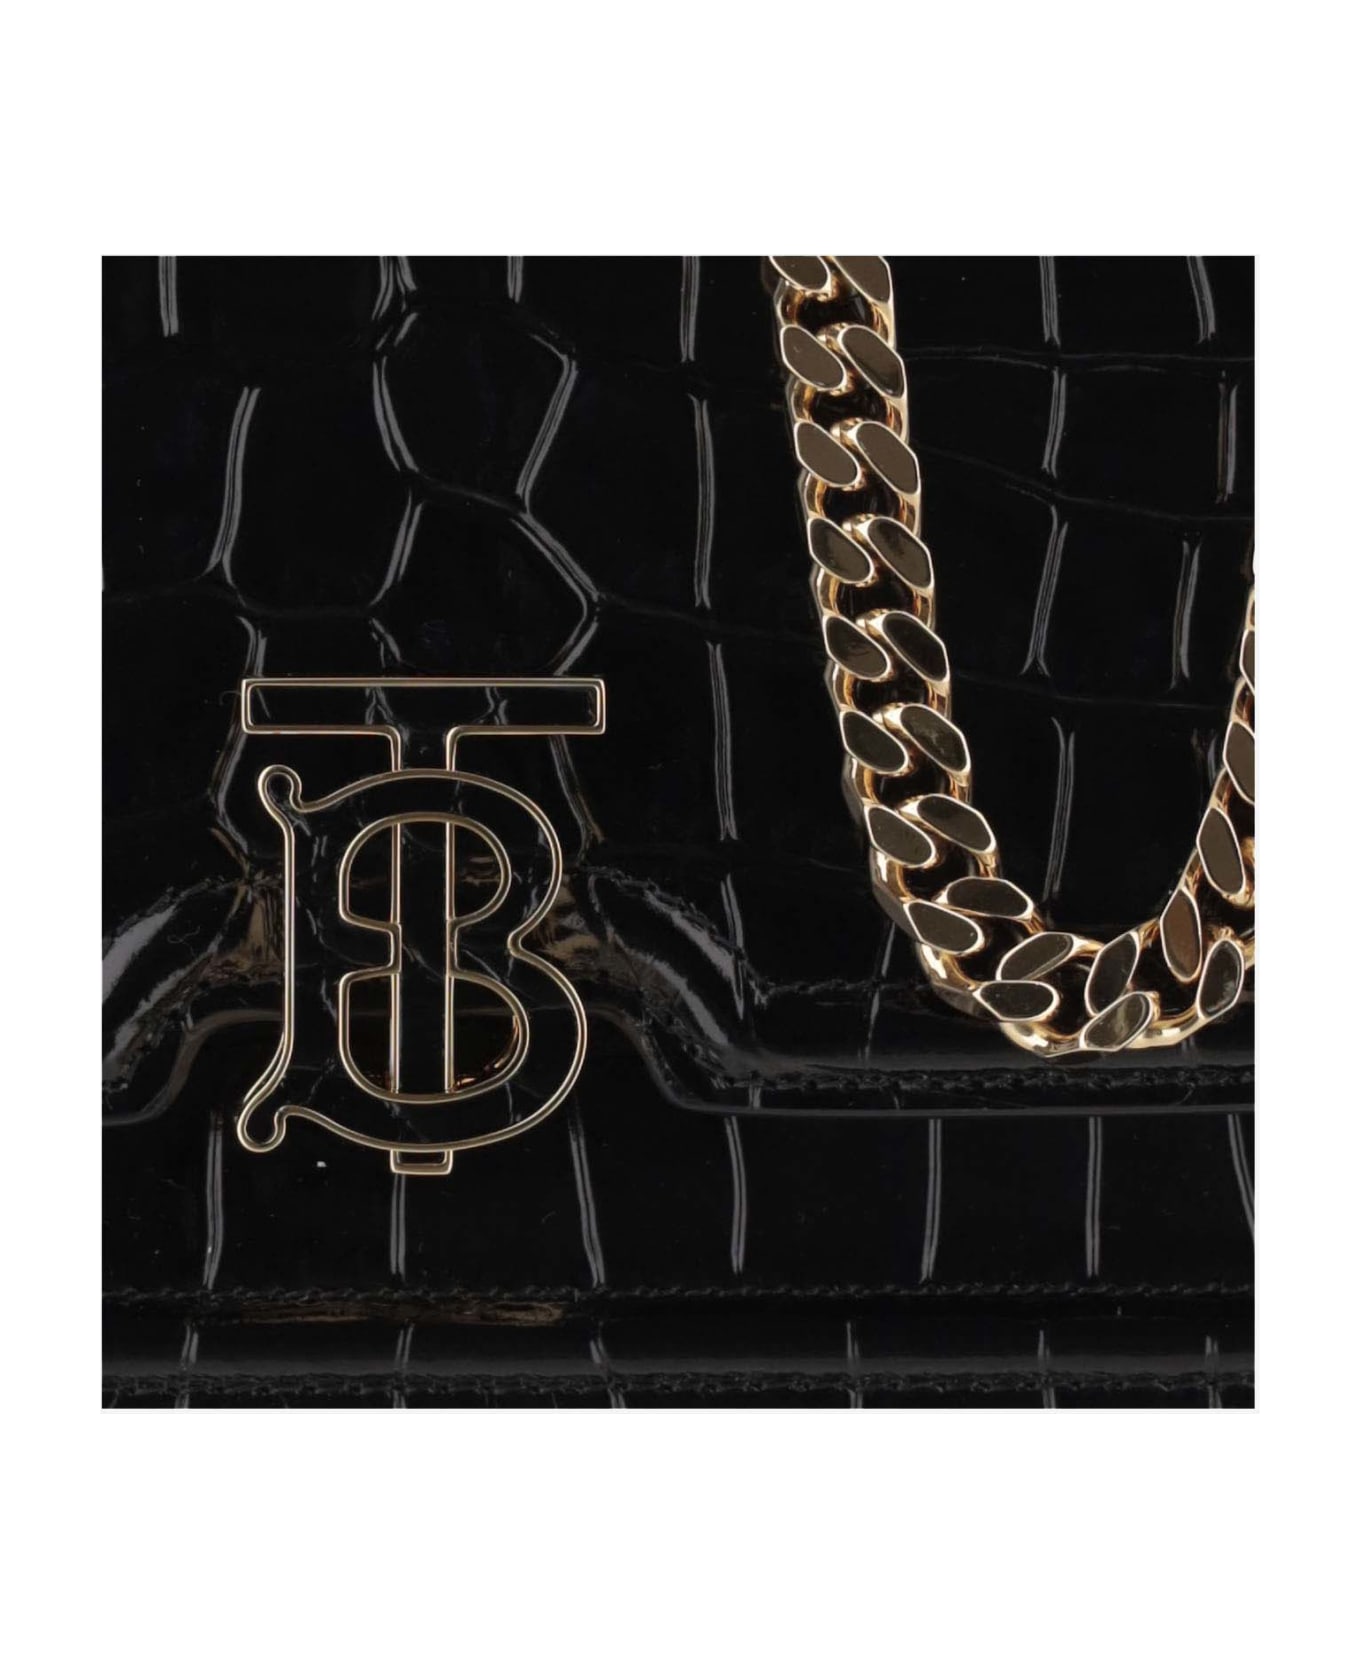 Burberry Tb Mini Embossed Leather Bag With Chain Strap - Black